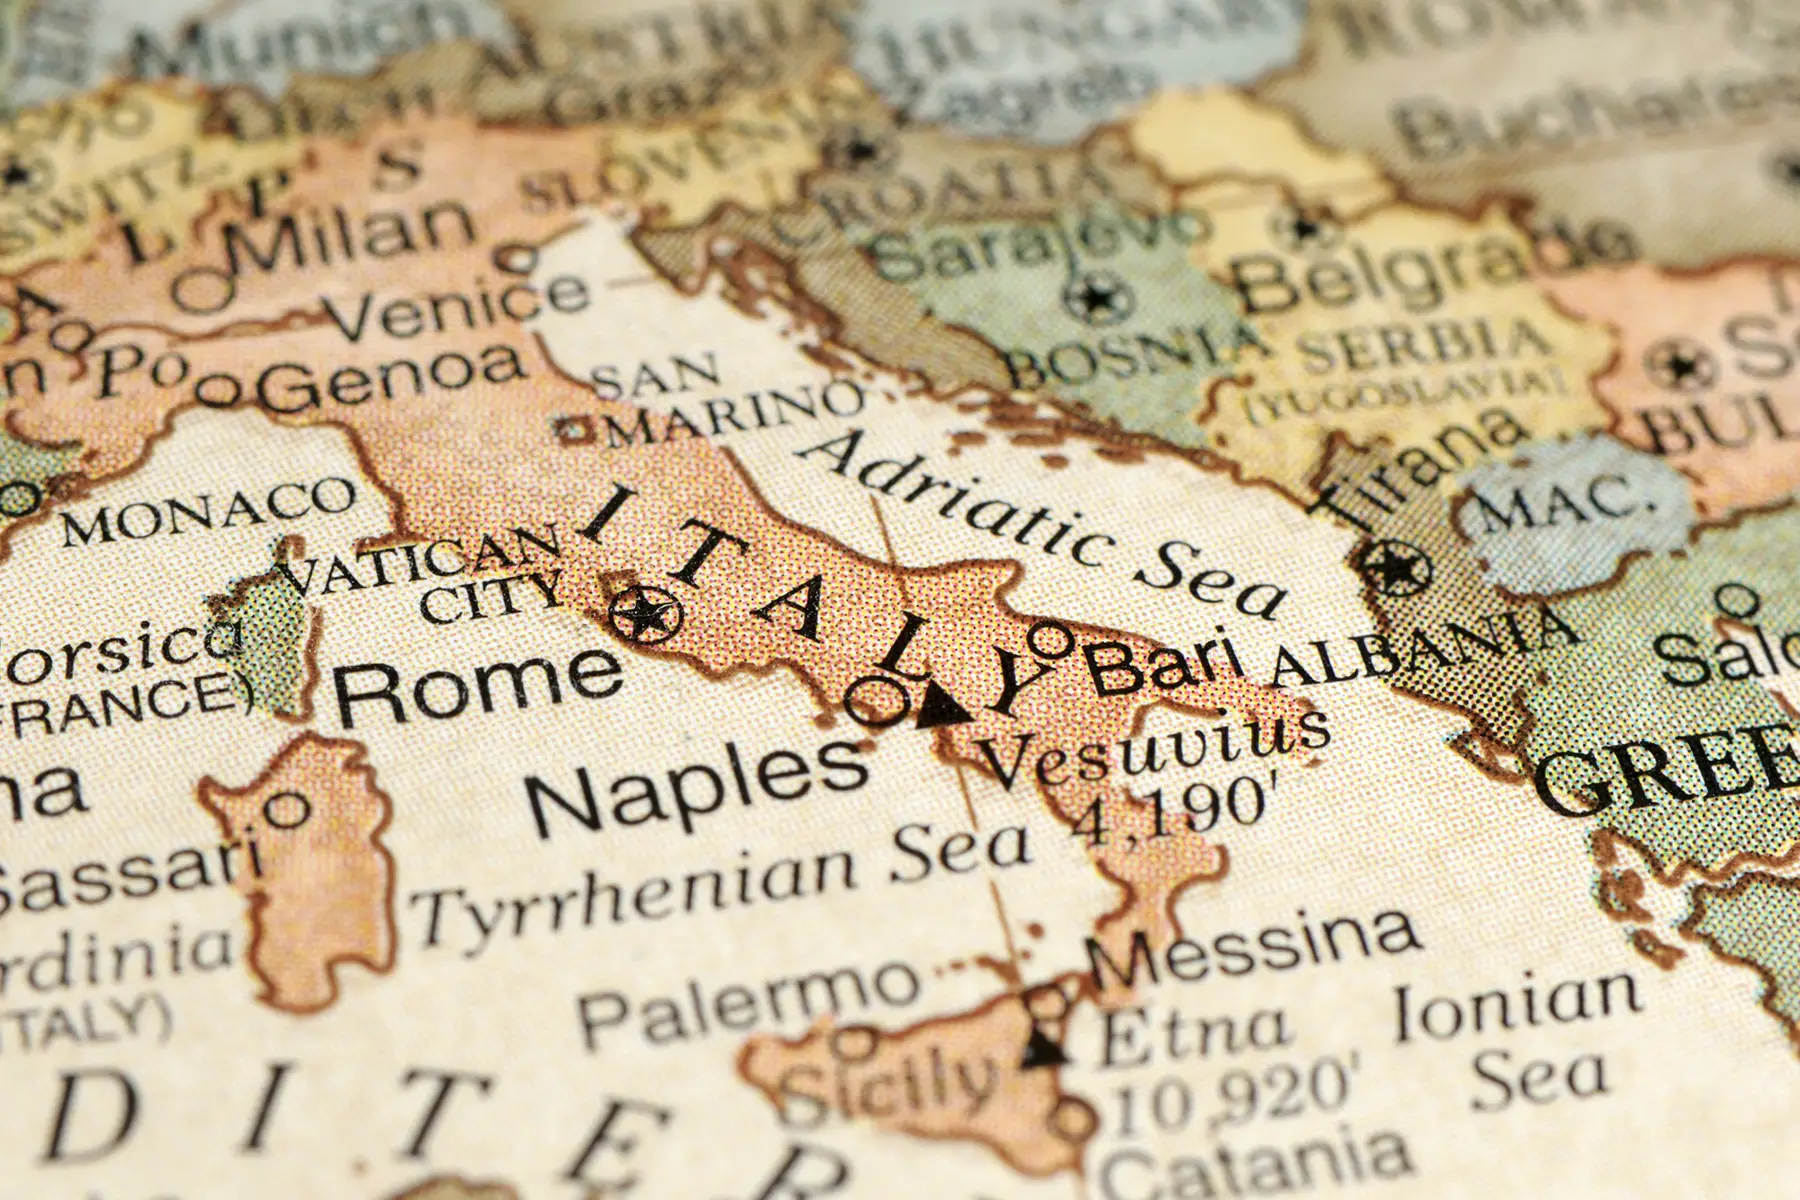 A map showing Italy